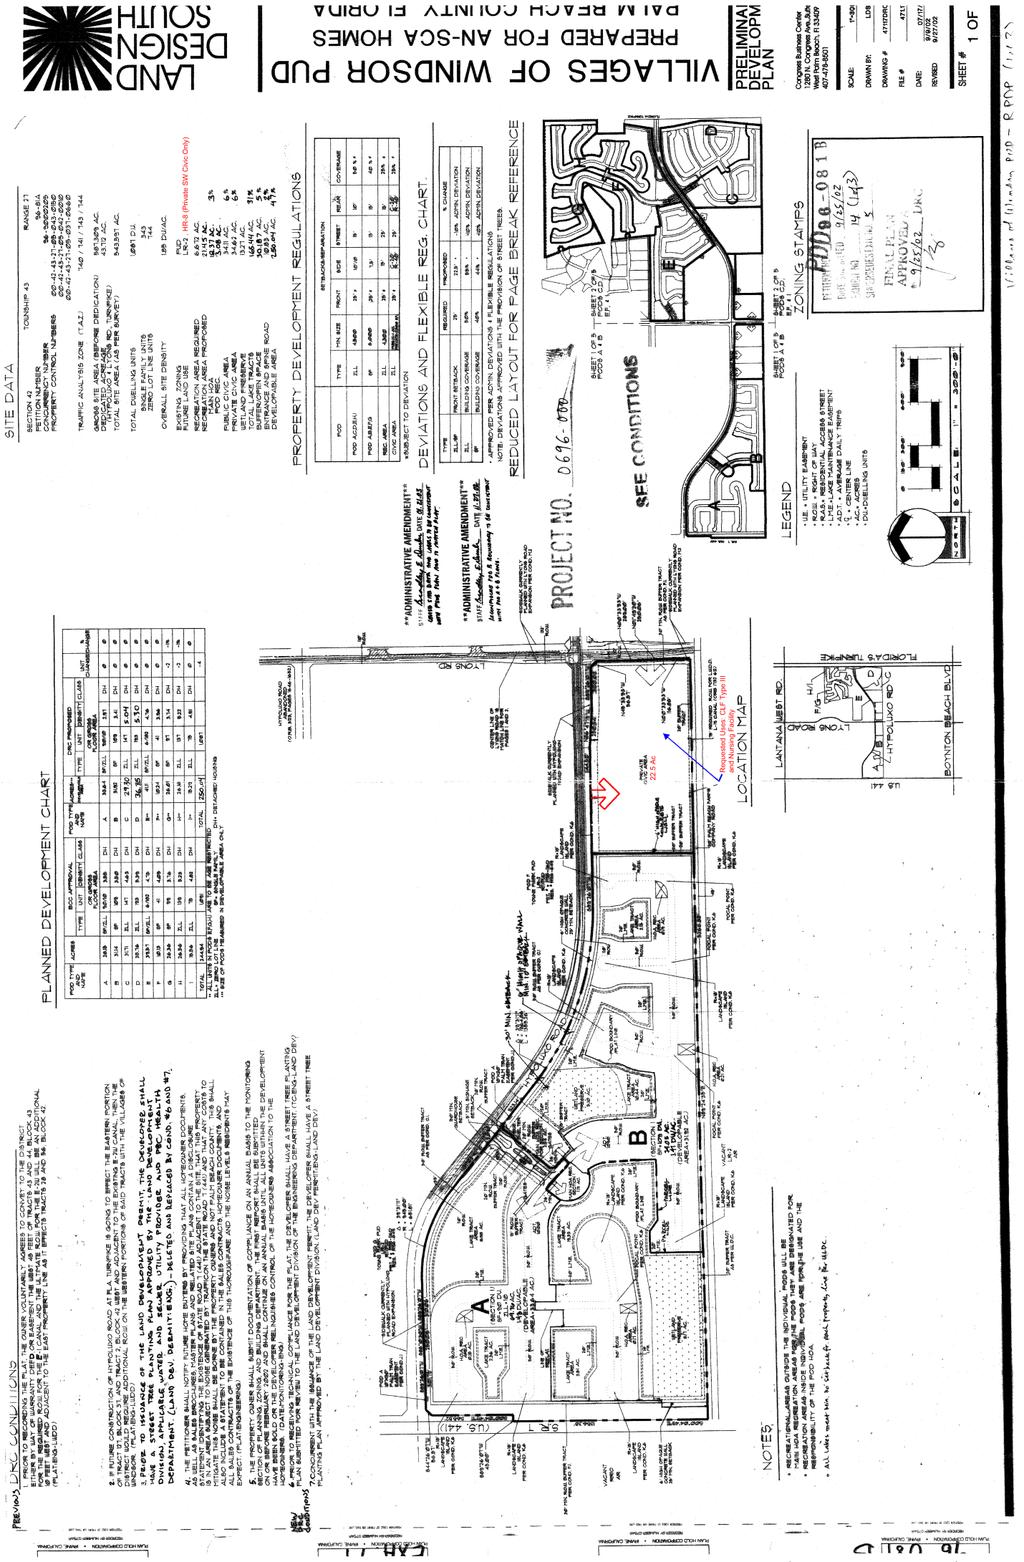 Figure 4 Preliminary Master Site Plan dated January 18, 2011 page 1 of 2